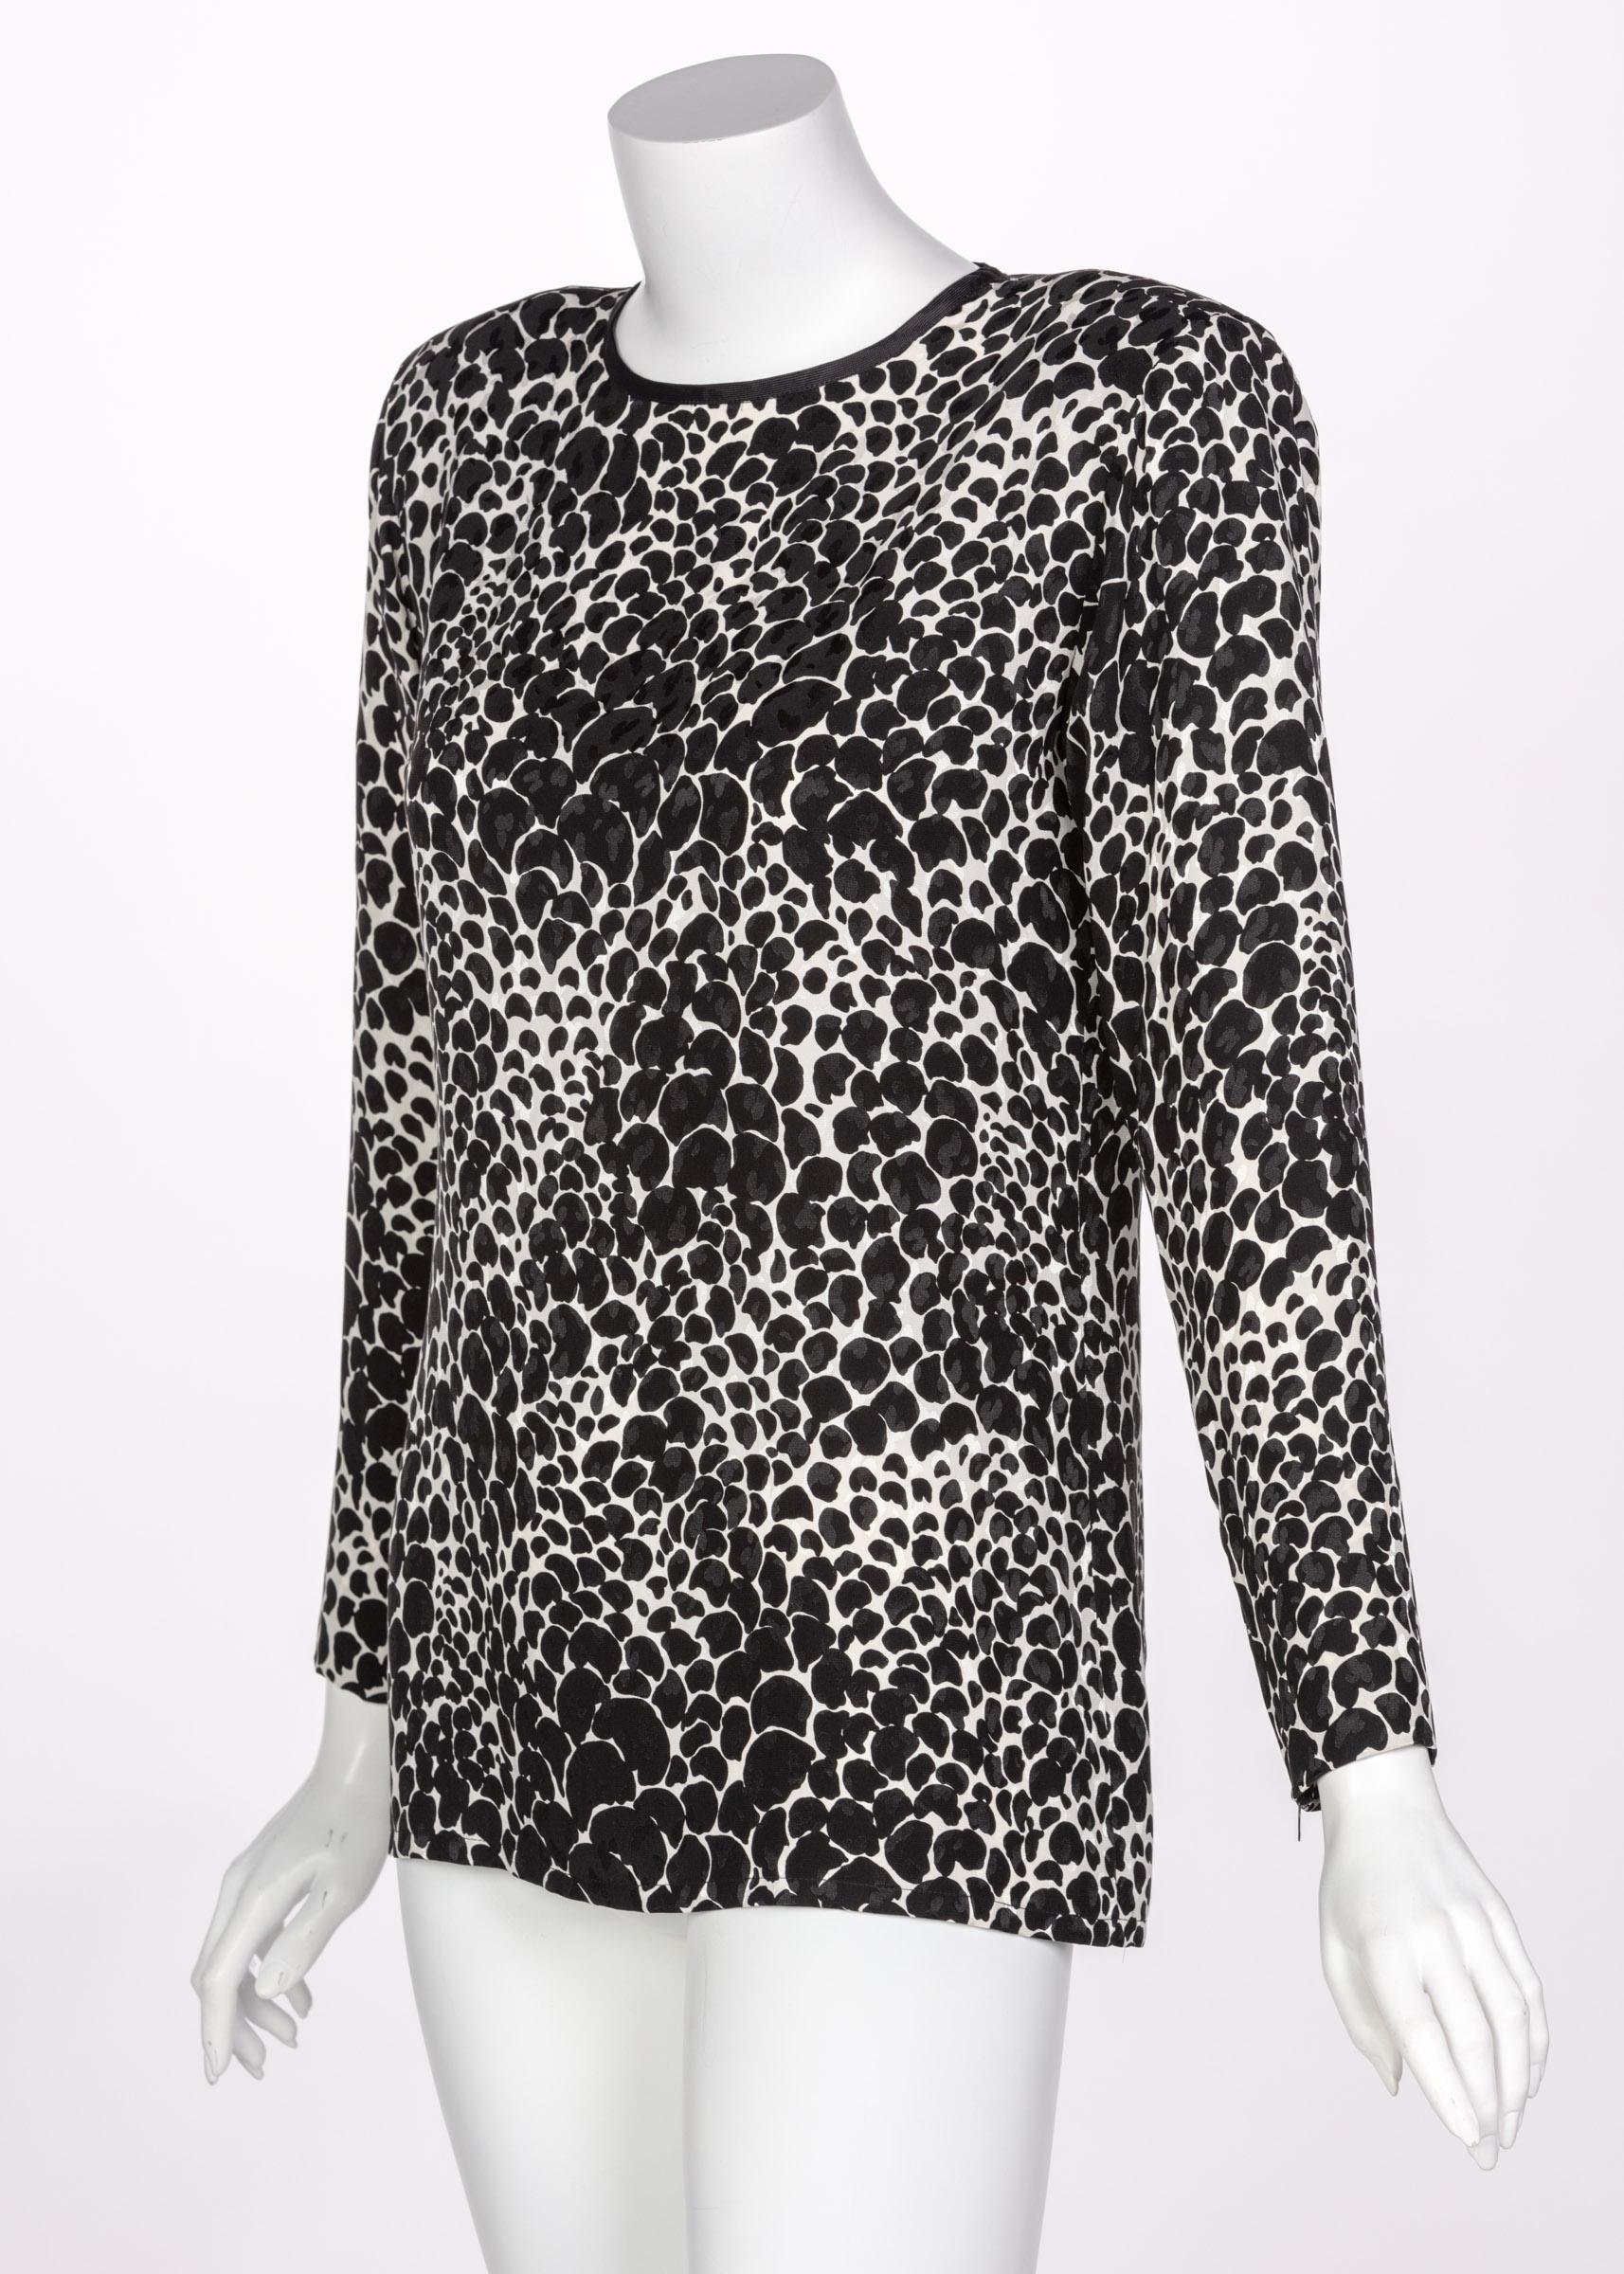 Yves Saint Laurent YSL Black White Silk Print Blouse Top, 1970s In Excellent Condition For Sale In Boca Raton, FL